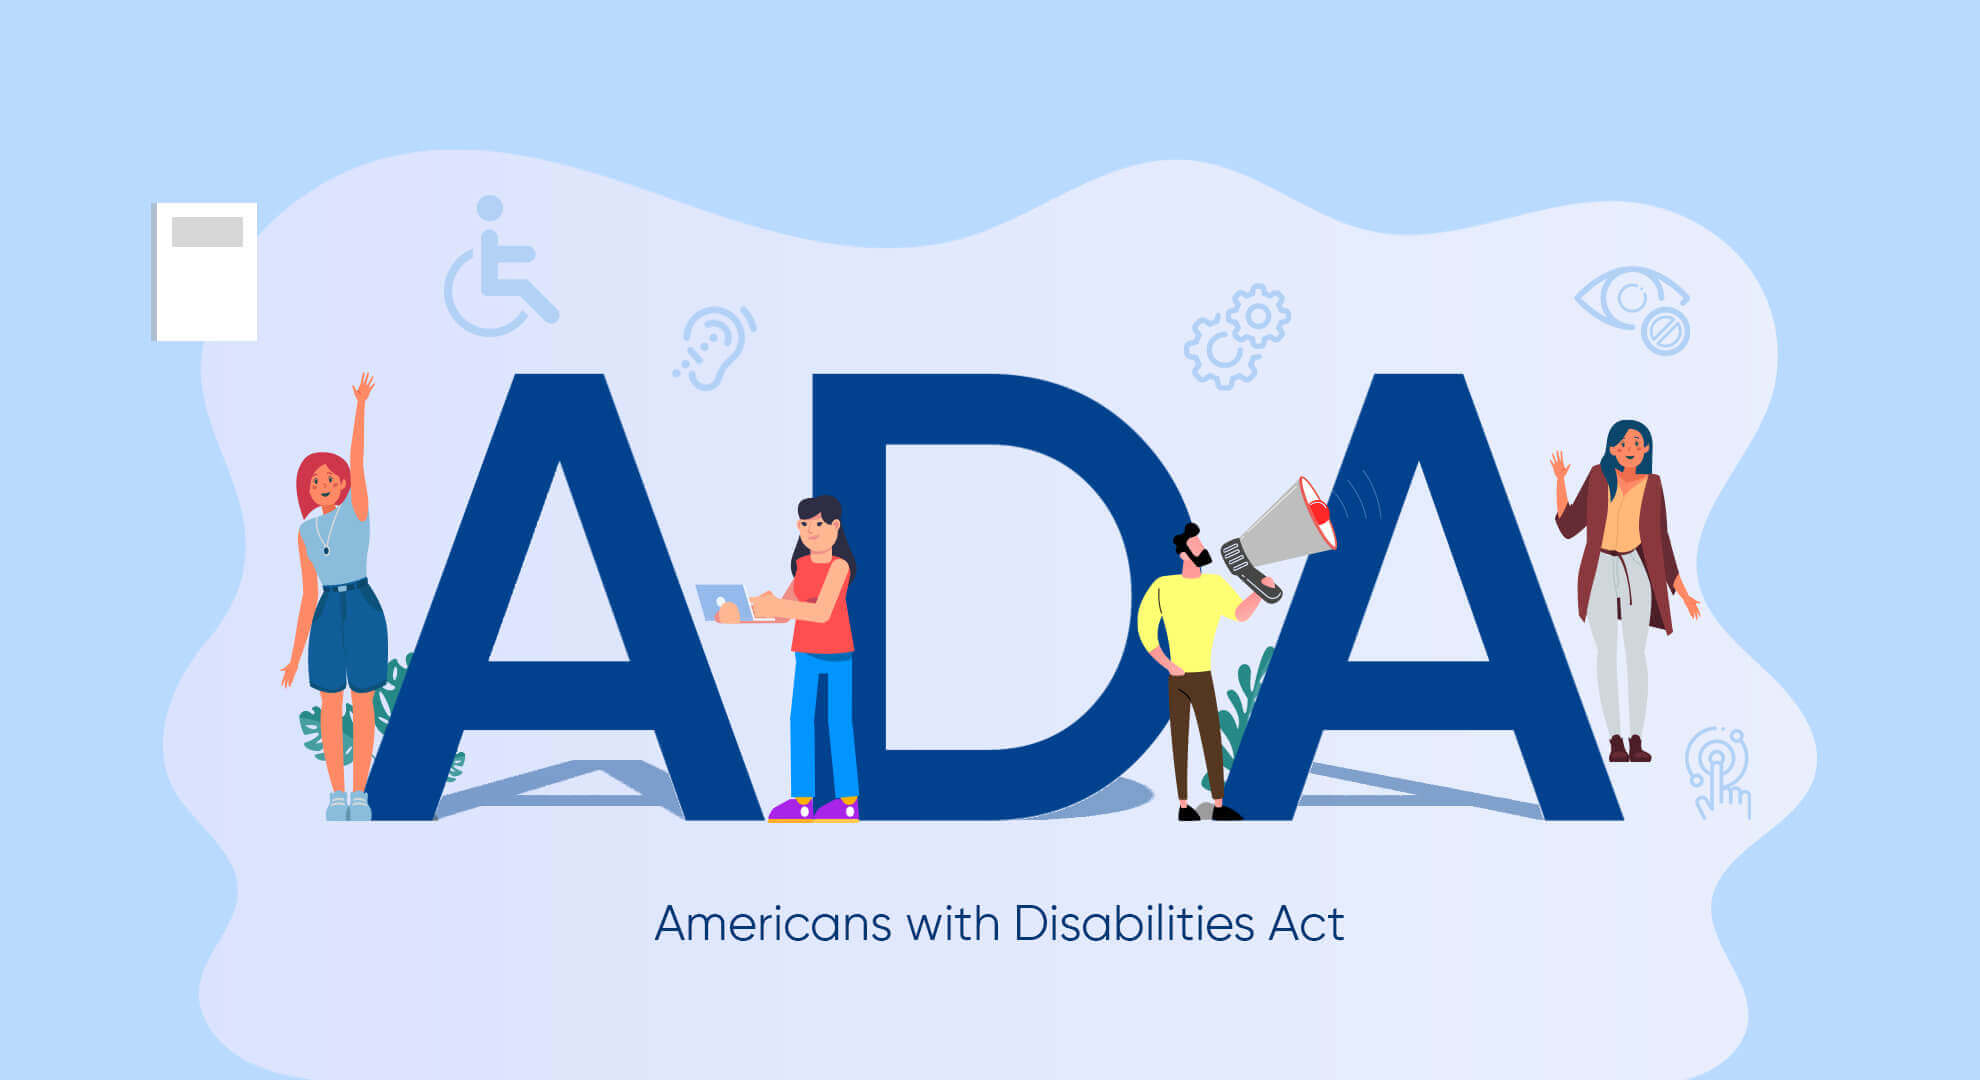 Visual illustration of ADA (Americans with Disabilities Act)